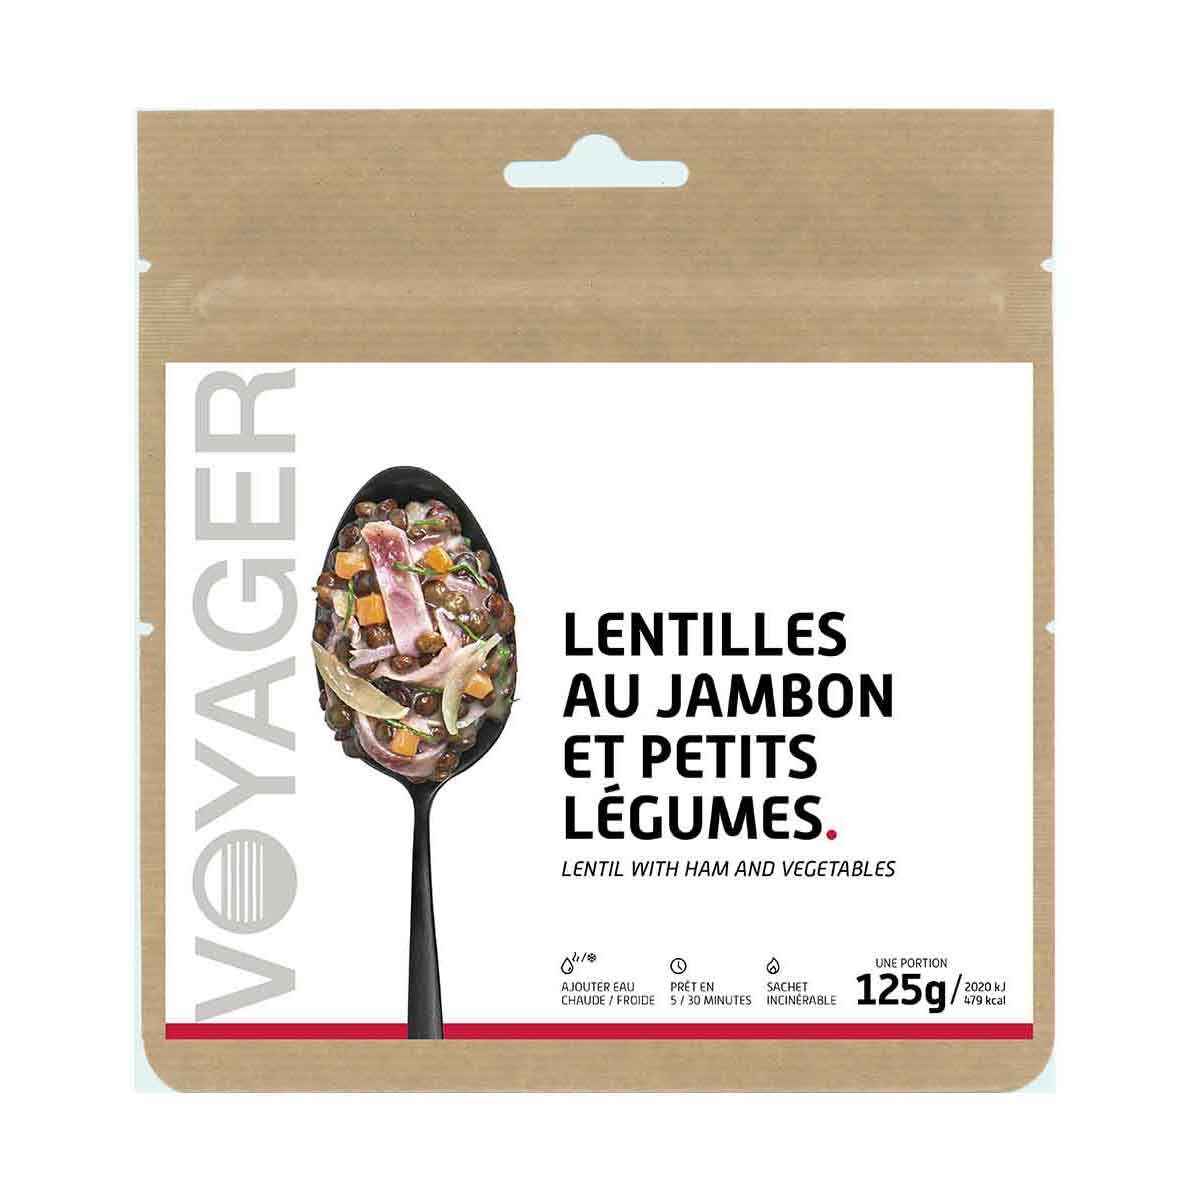 Lentils with ham and vegetables